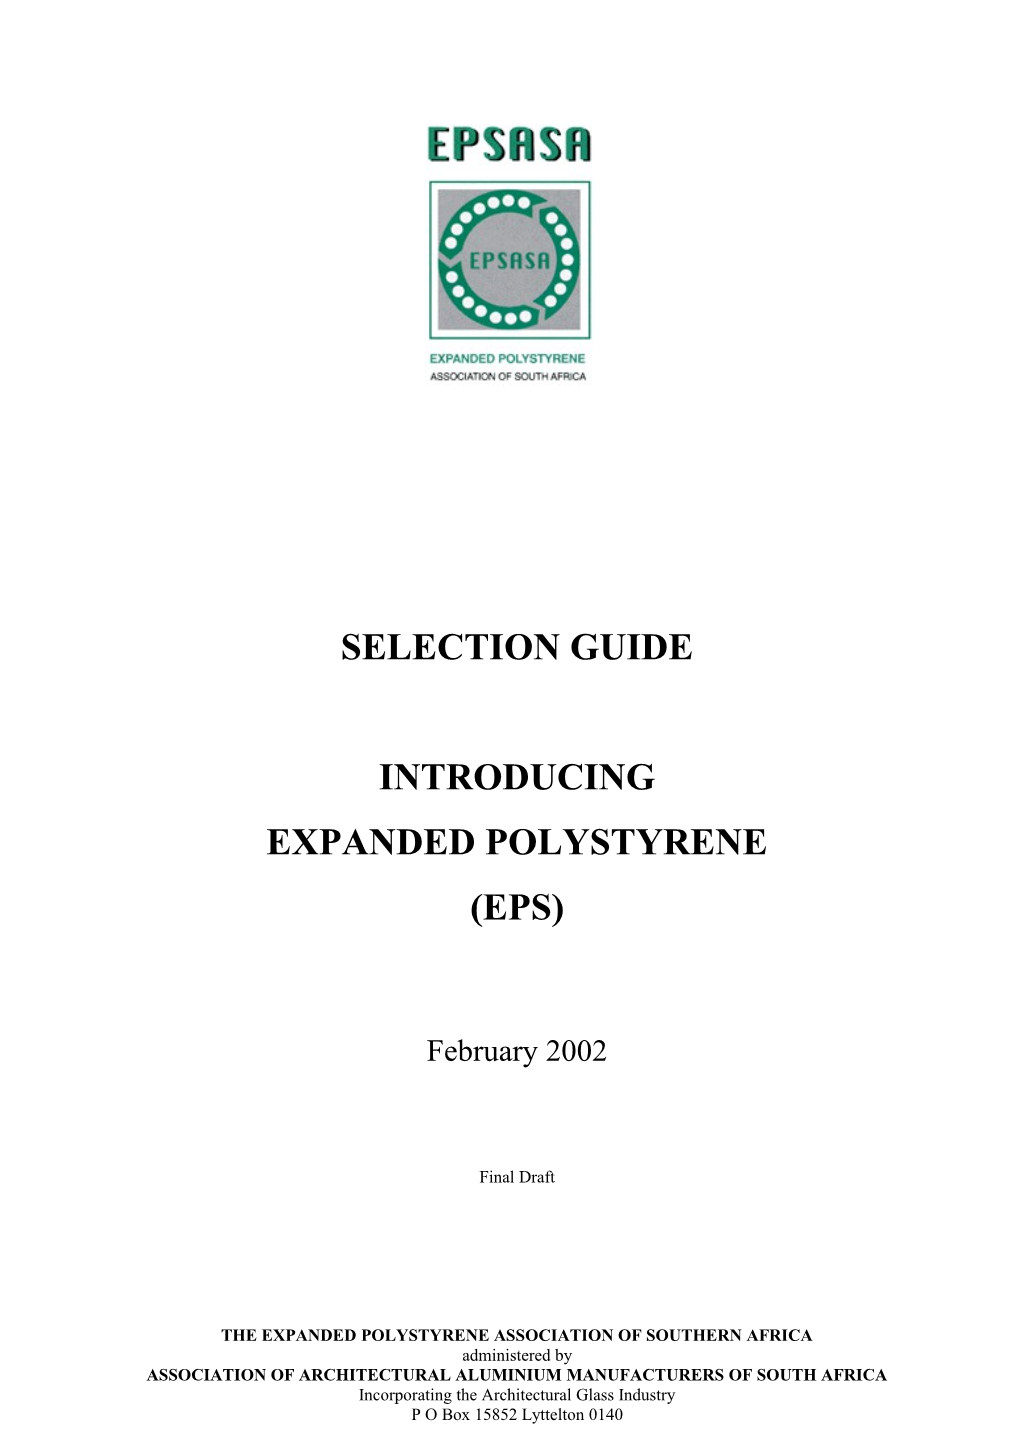 The Expanded Polystyrene Association of Southern Africa